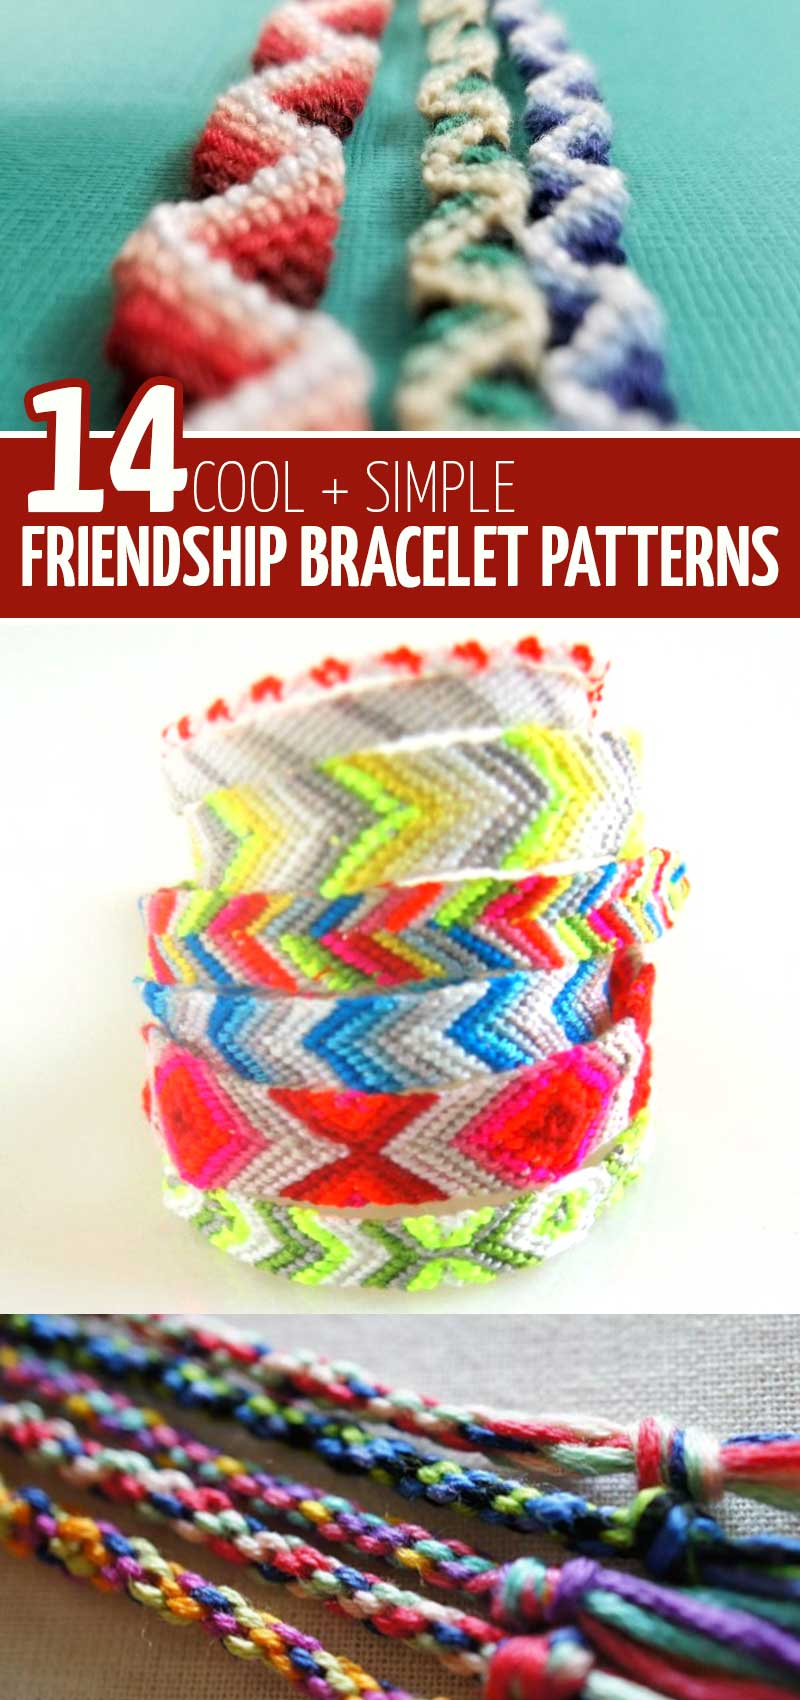 Embroidery Bracelets Patterns Diy Friendship Bracelet Tutorials And Patterns Moms And Crafters